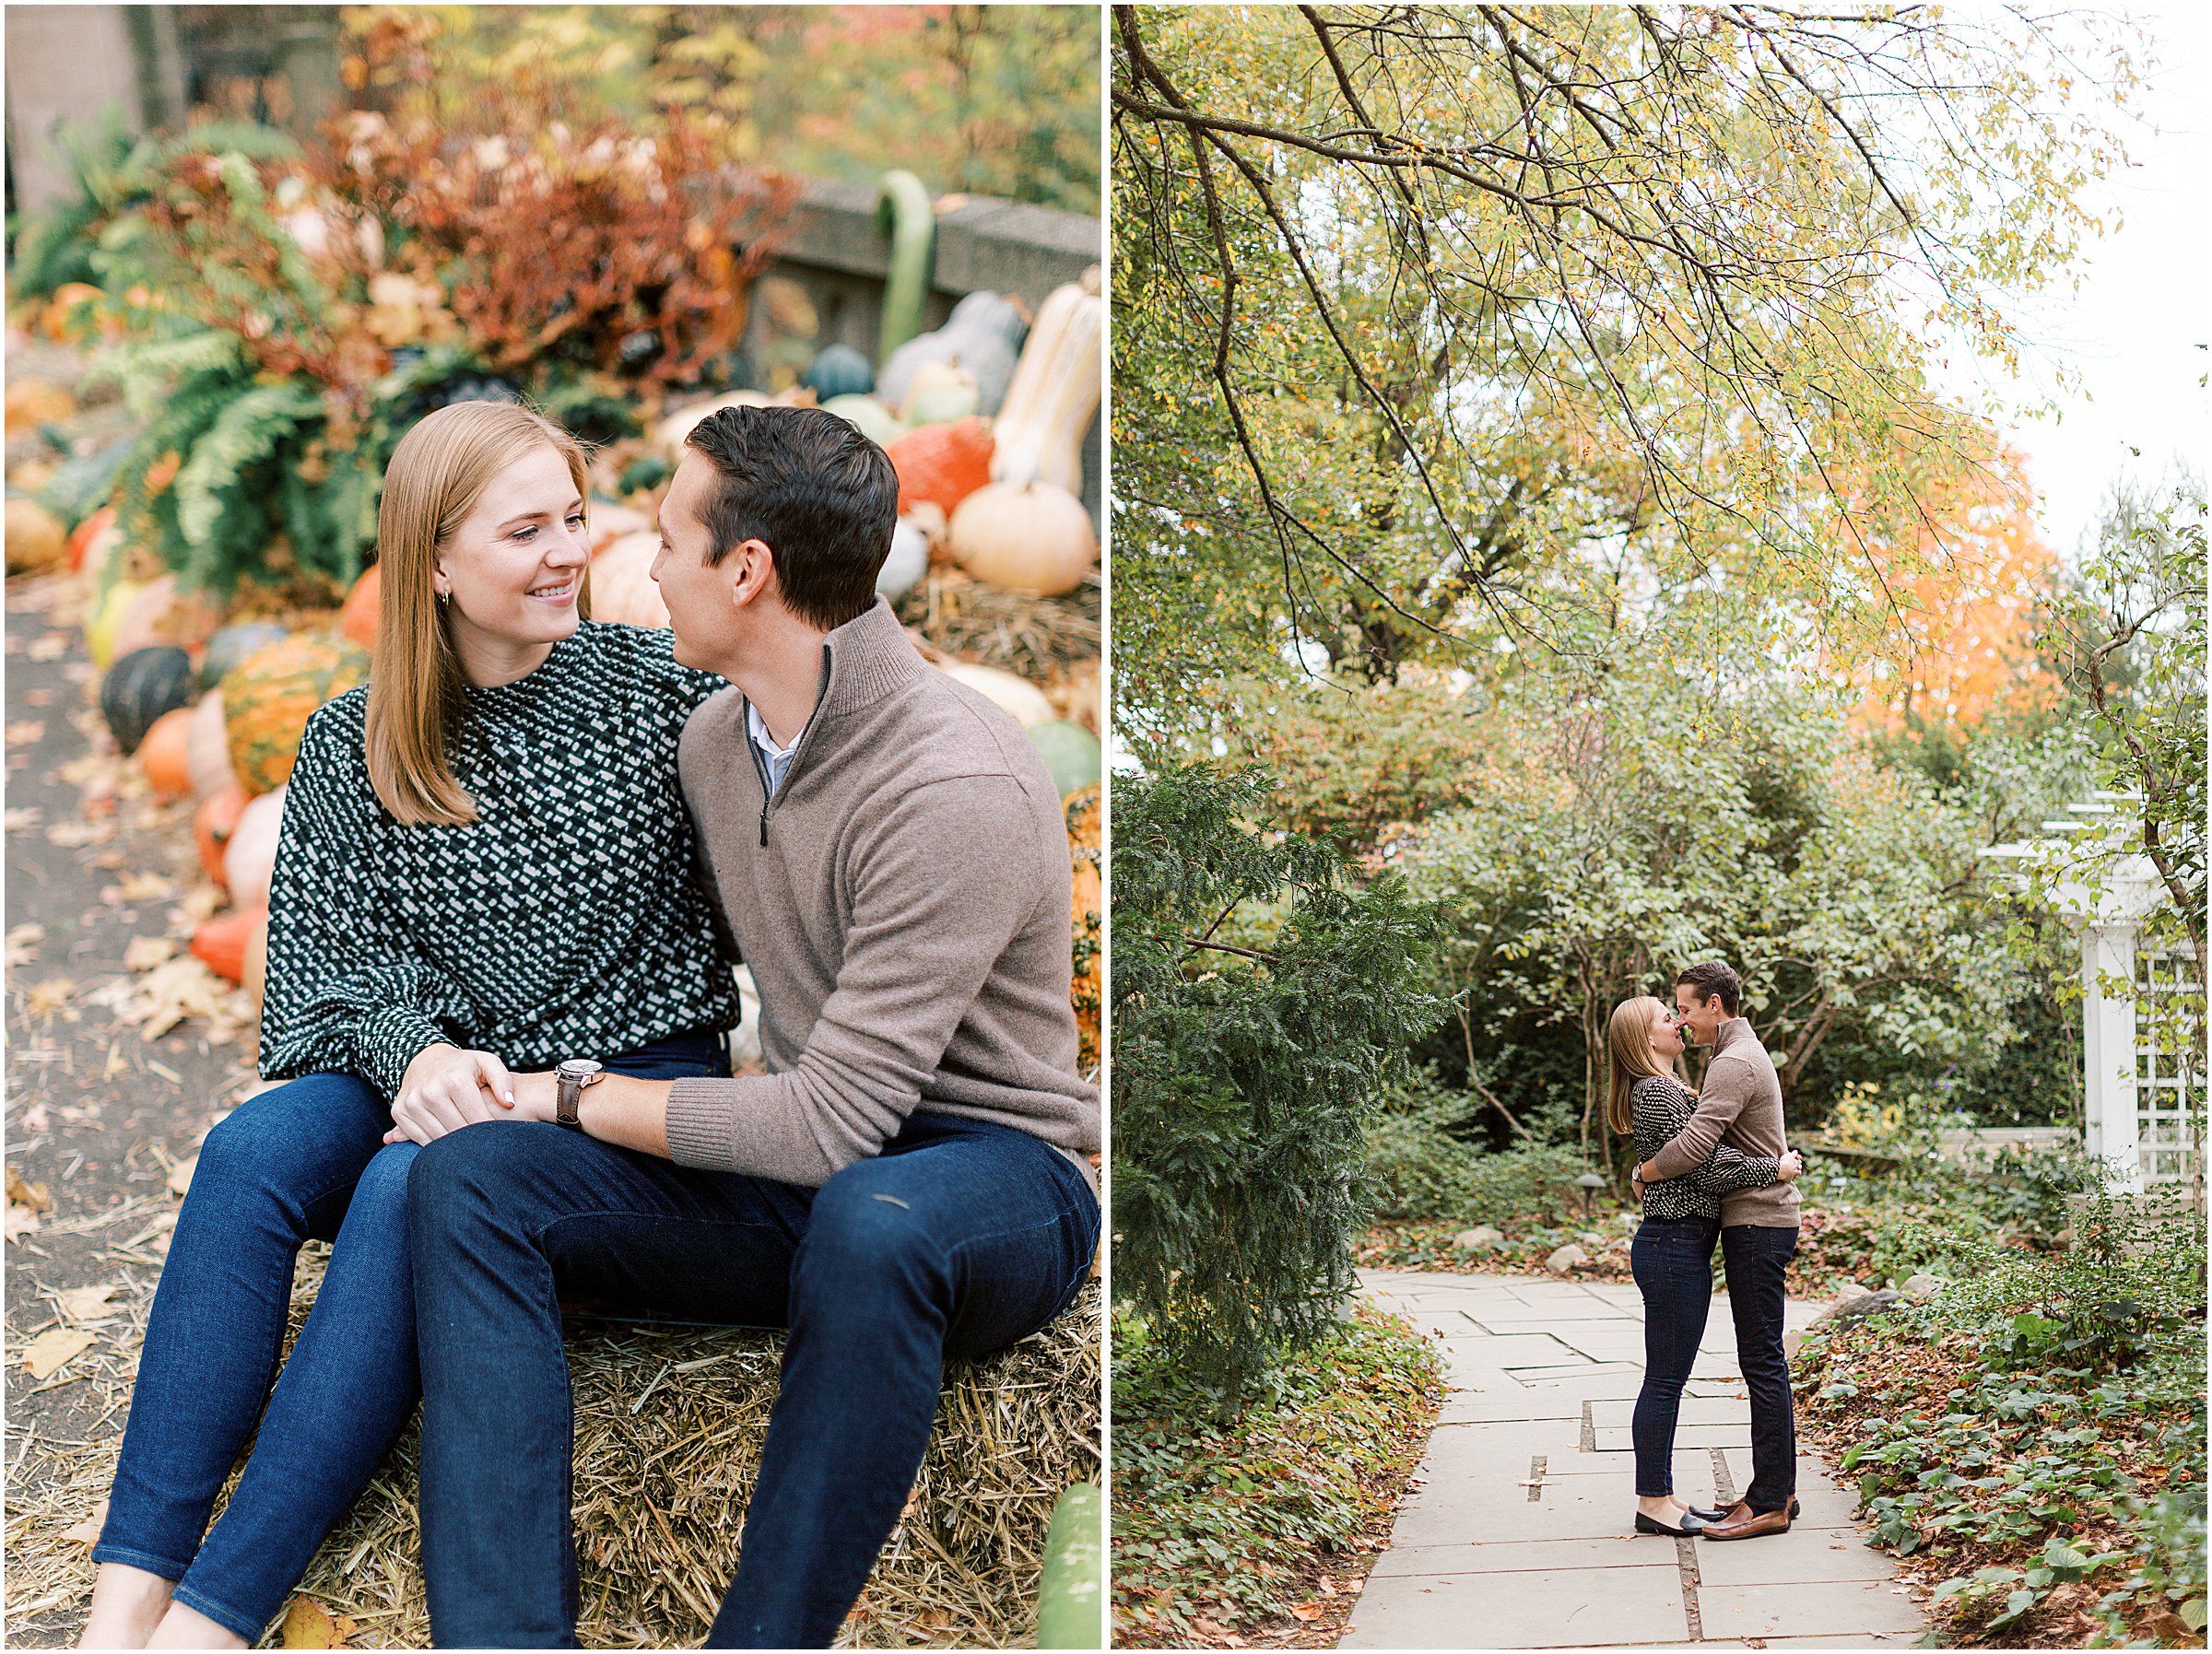 Autumn Newfields Engagement Session_0010.jpg